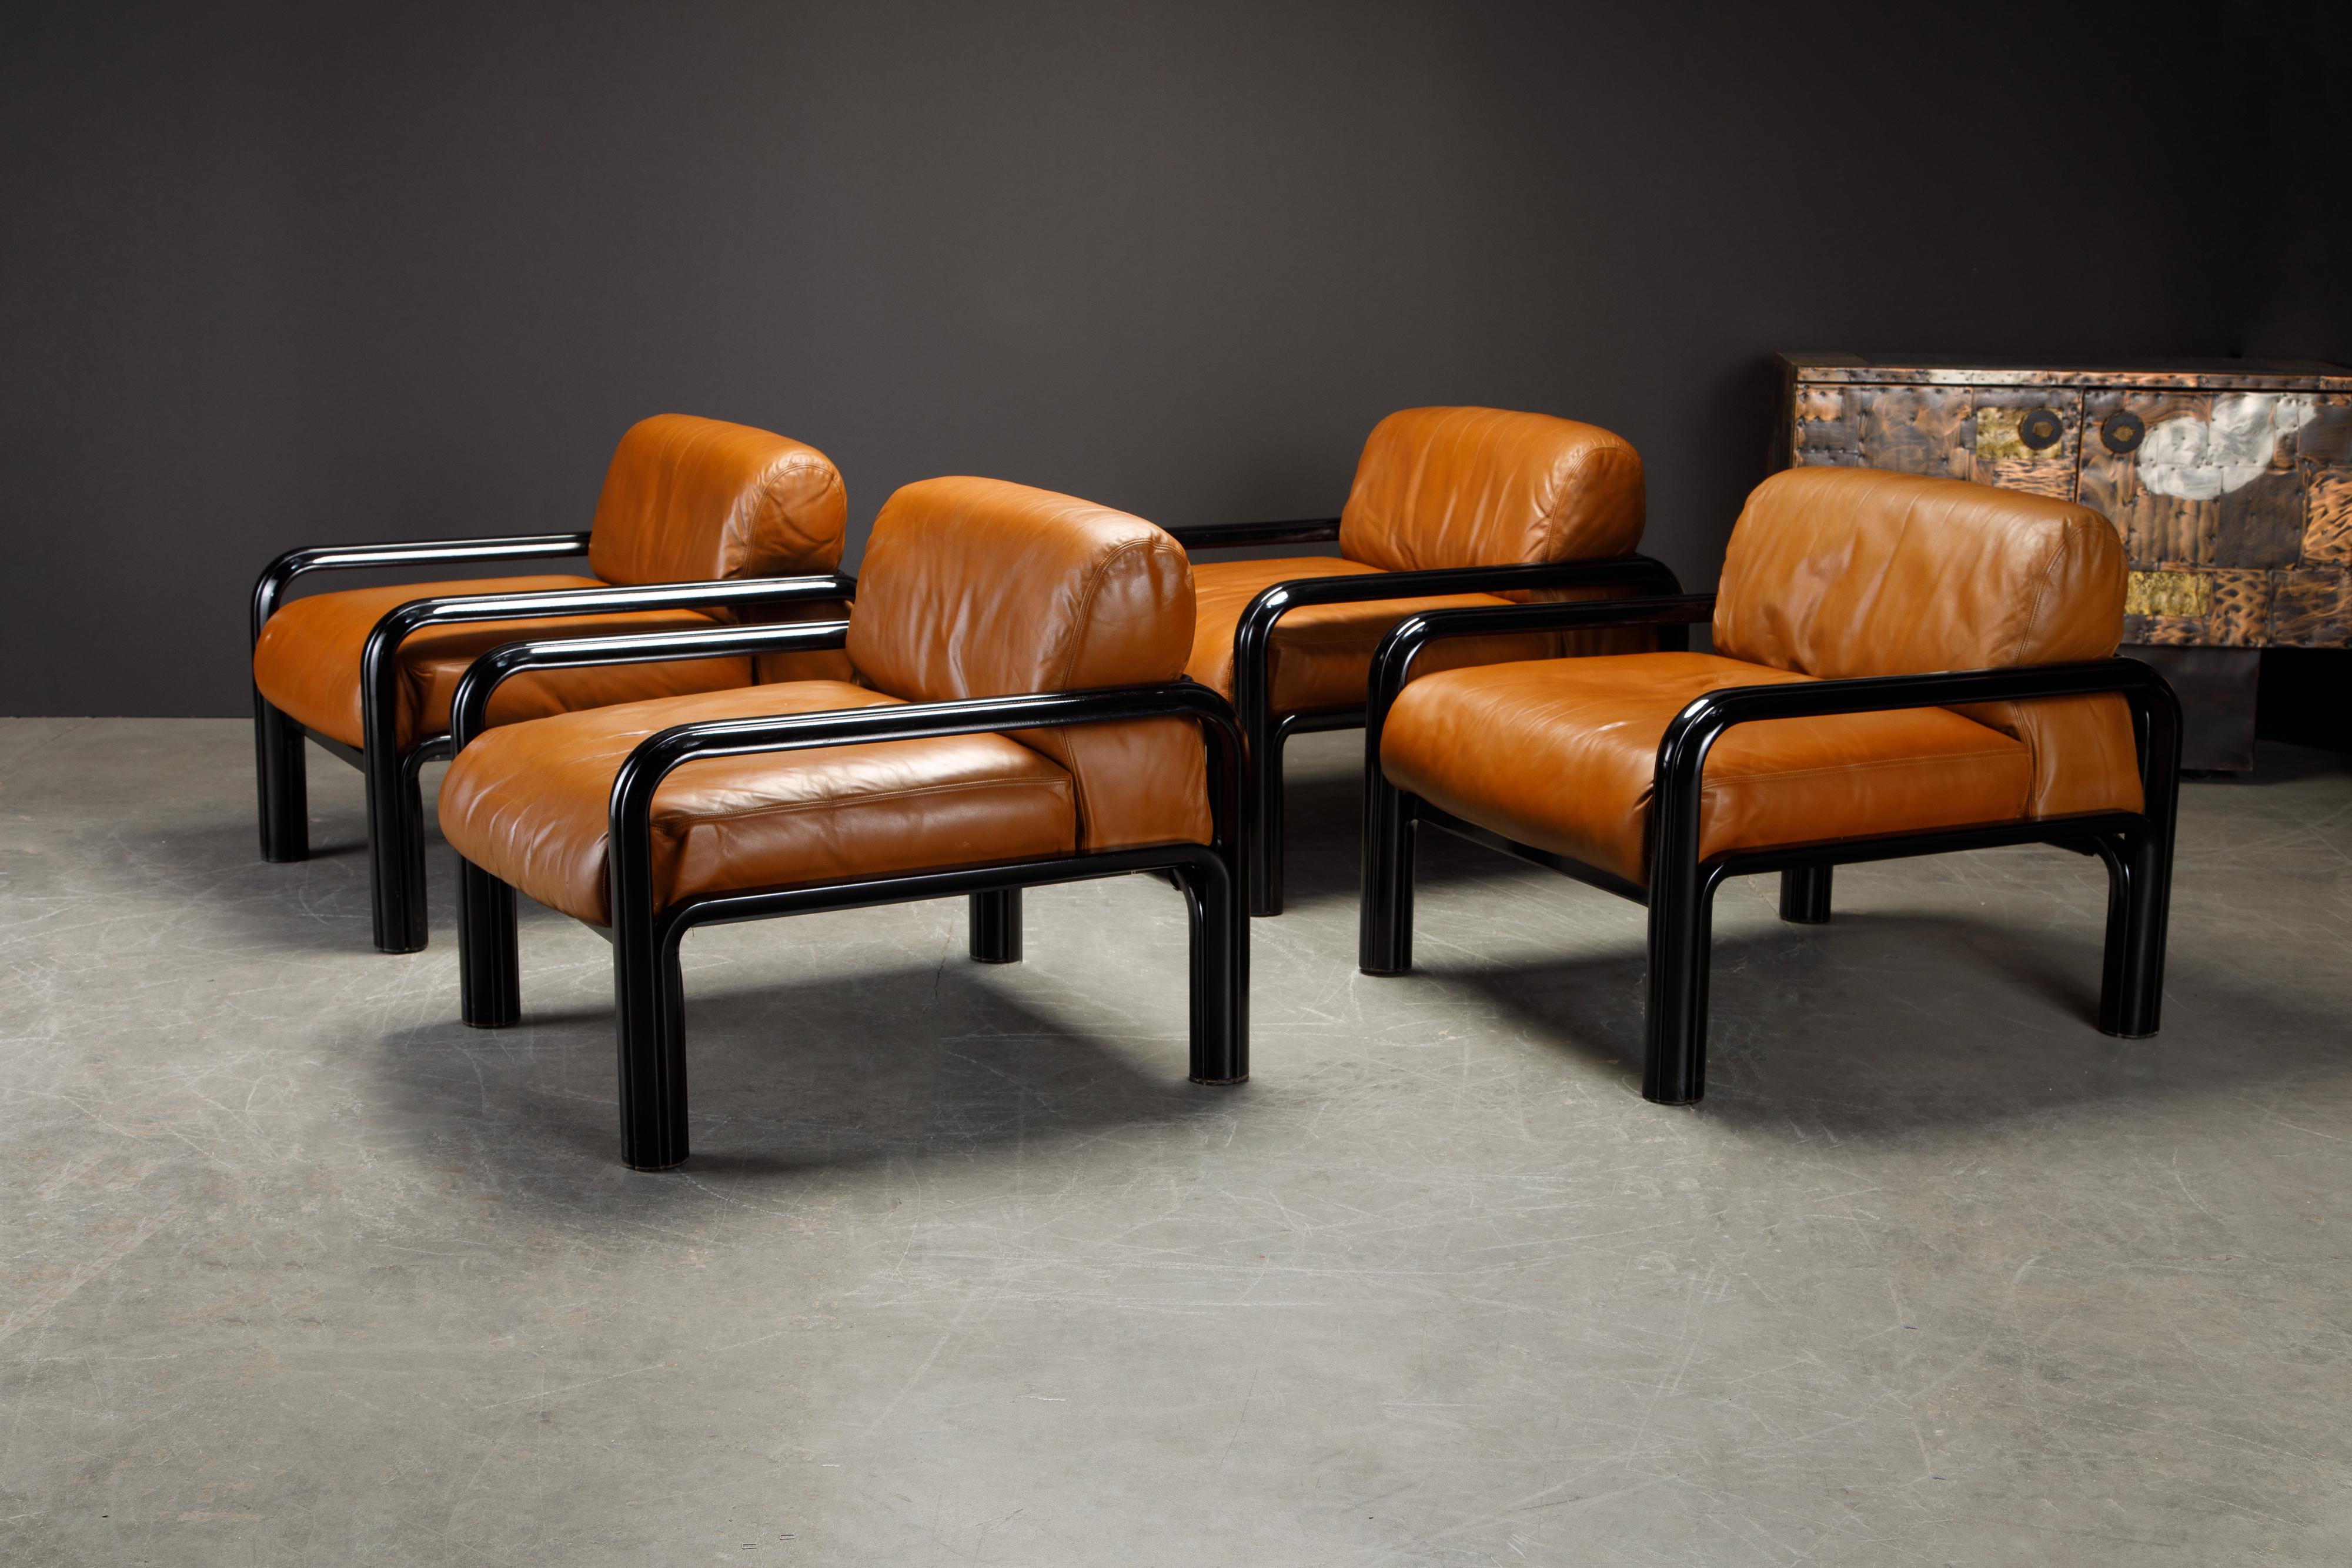 An incredible collectors set of four (4) signed Gae Aulenti for Knoll International lounge chairs, signed and date stamped October 6 1980, the same great year that brought us The Blues Brothers, Friday the 13th, Caddyshack, Airplane! and The Empire